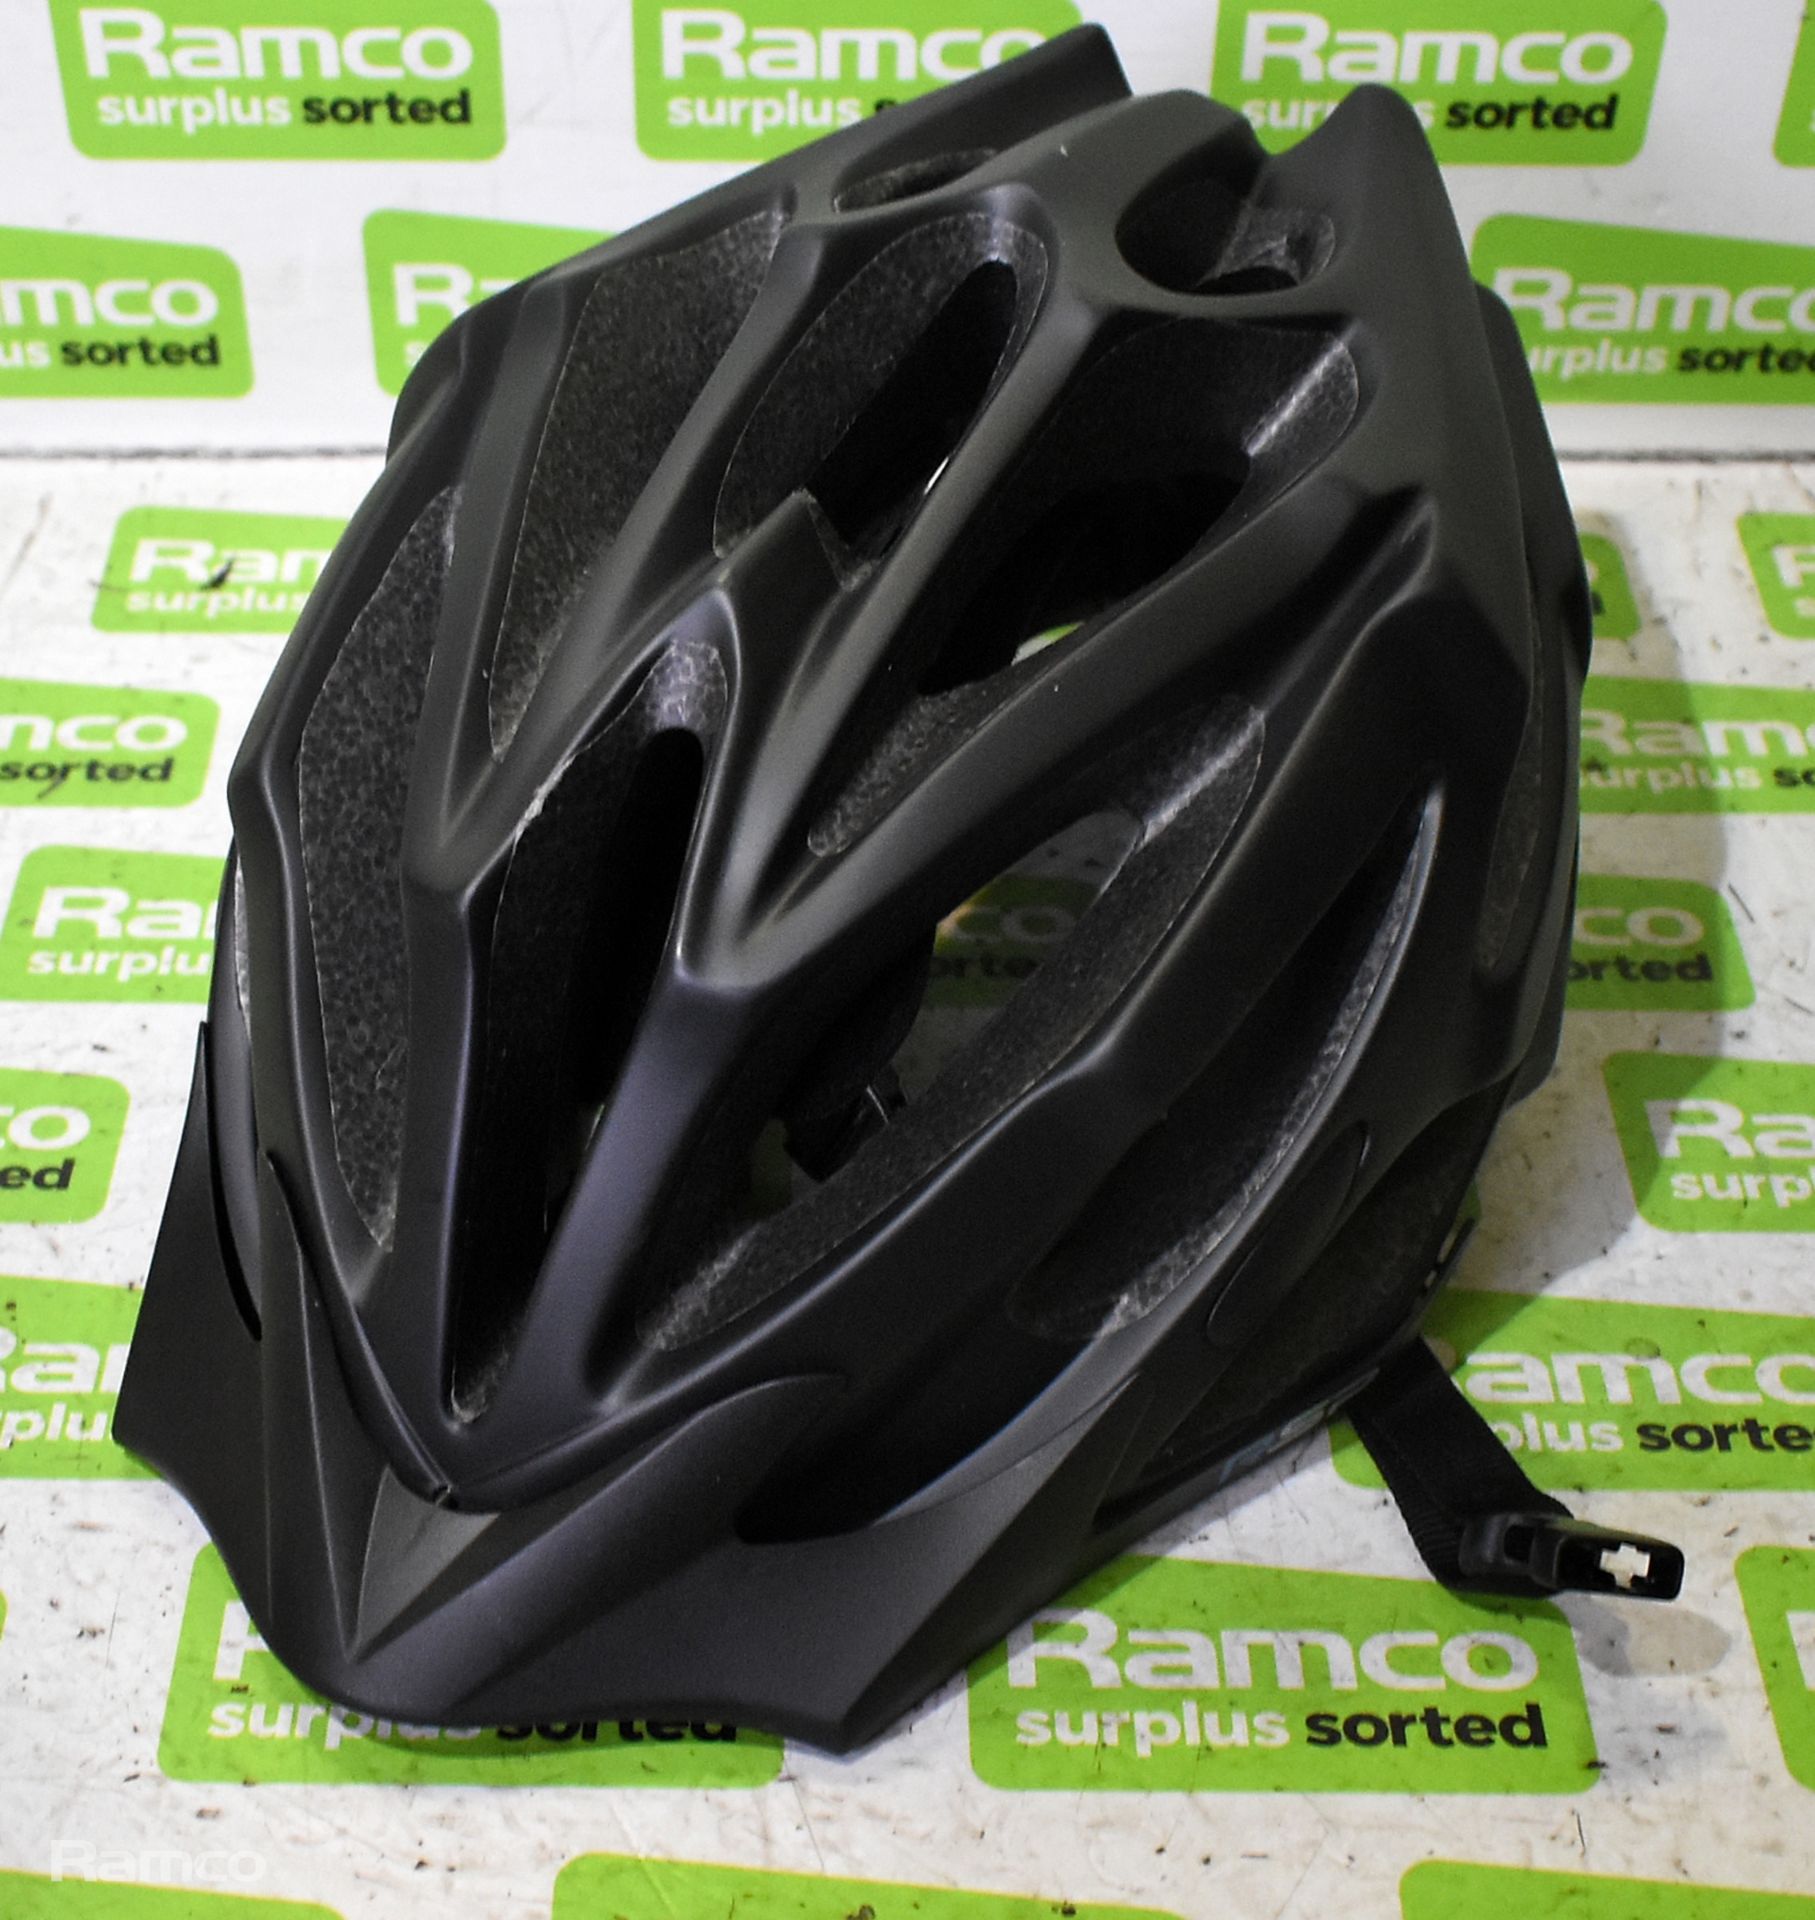 6x Raleigh Extreme cycle helmets - size 58-61cm, 2x RSP Extreme cycle helmets - size 58-61cm - Image 3 of 4